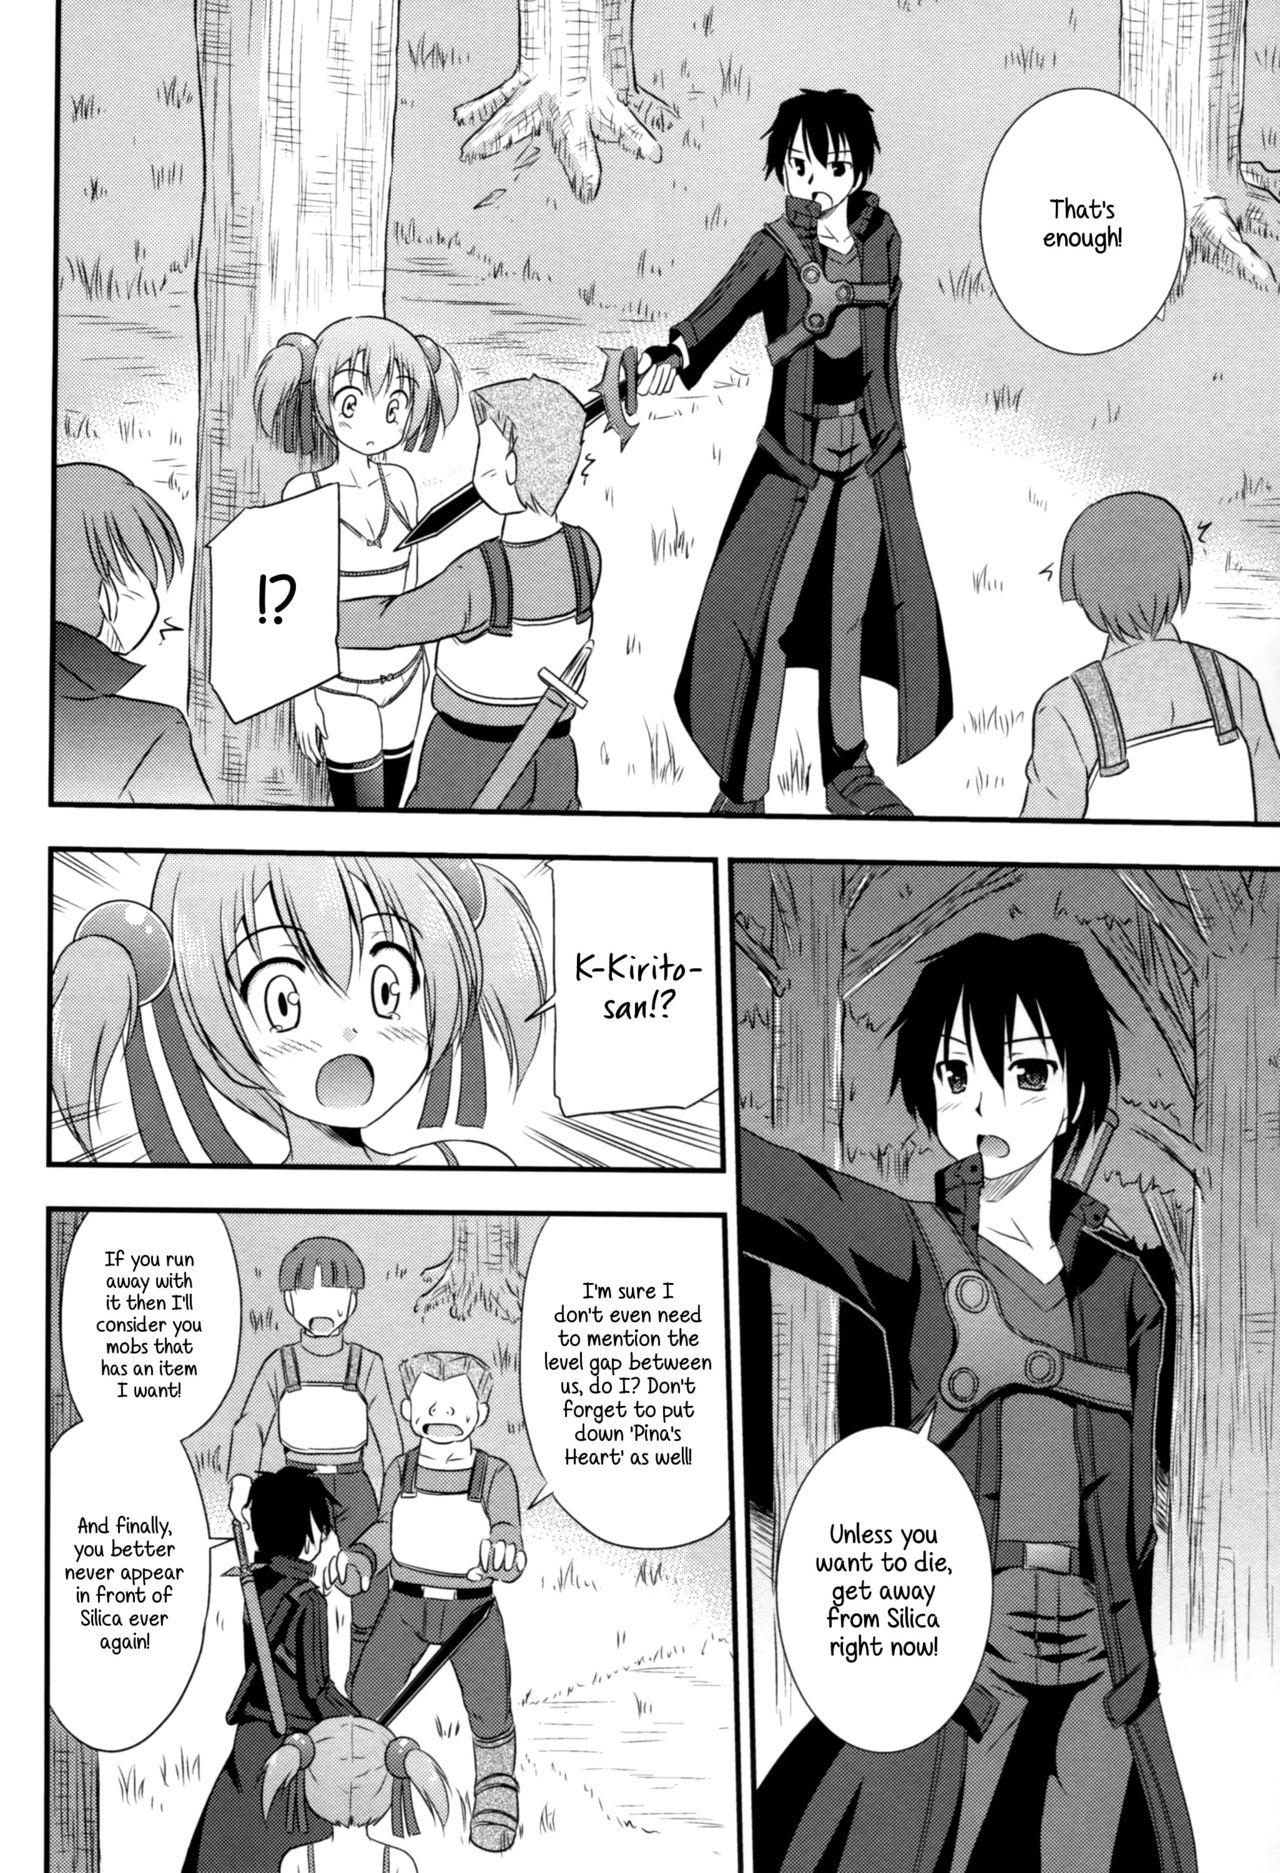 Class Room Silica Route Online - Sword art online Tittyfuck - Page 9